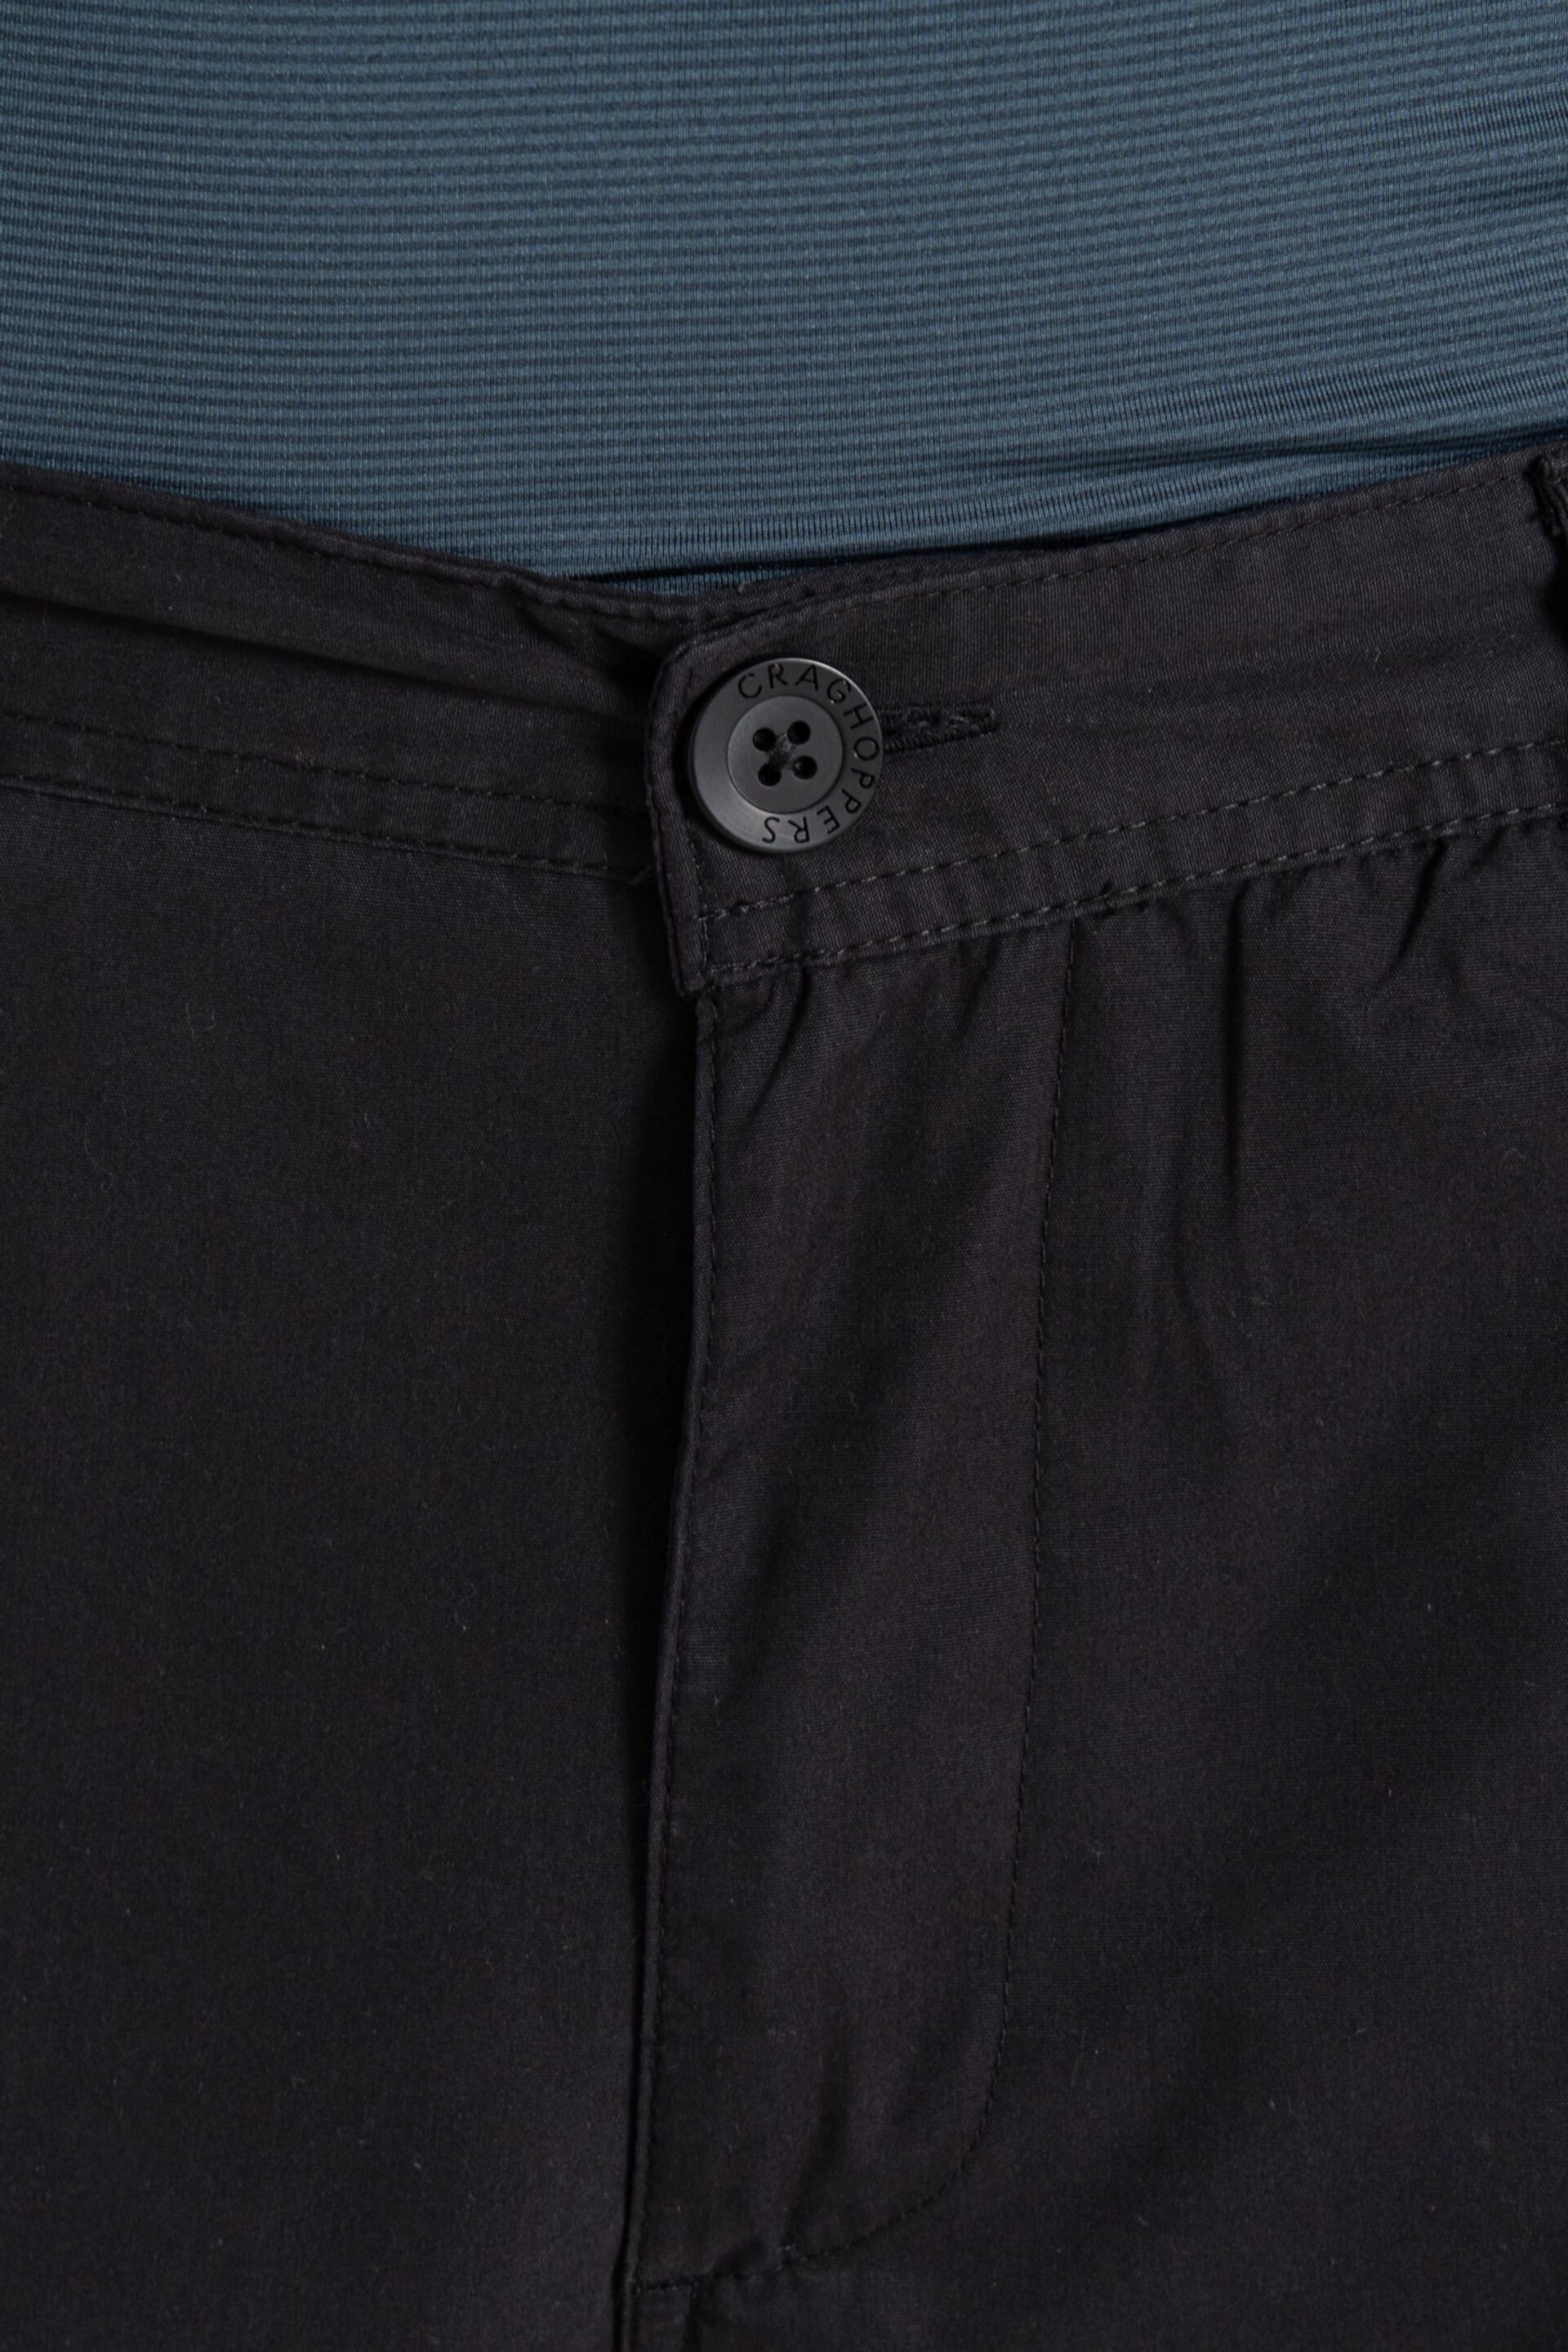 Craghoppers Black Brisk Trousers - Image 5 of 5